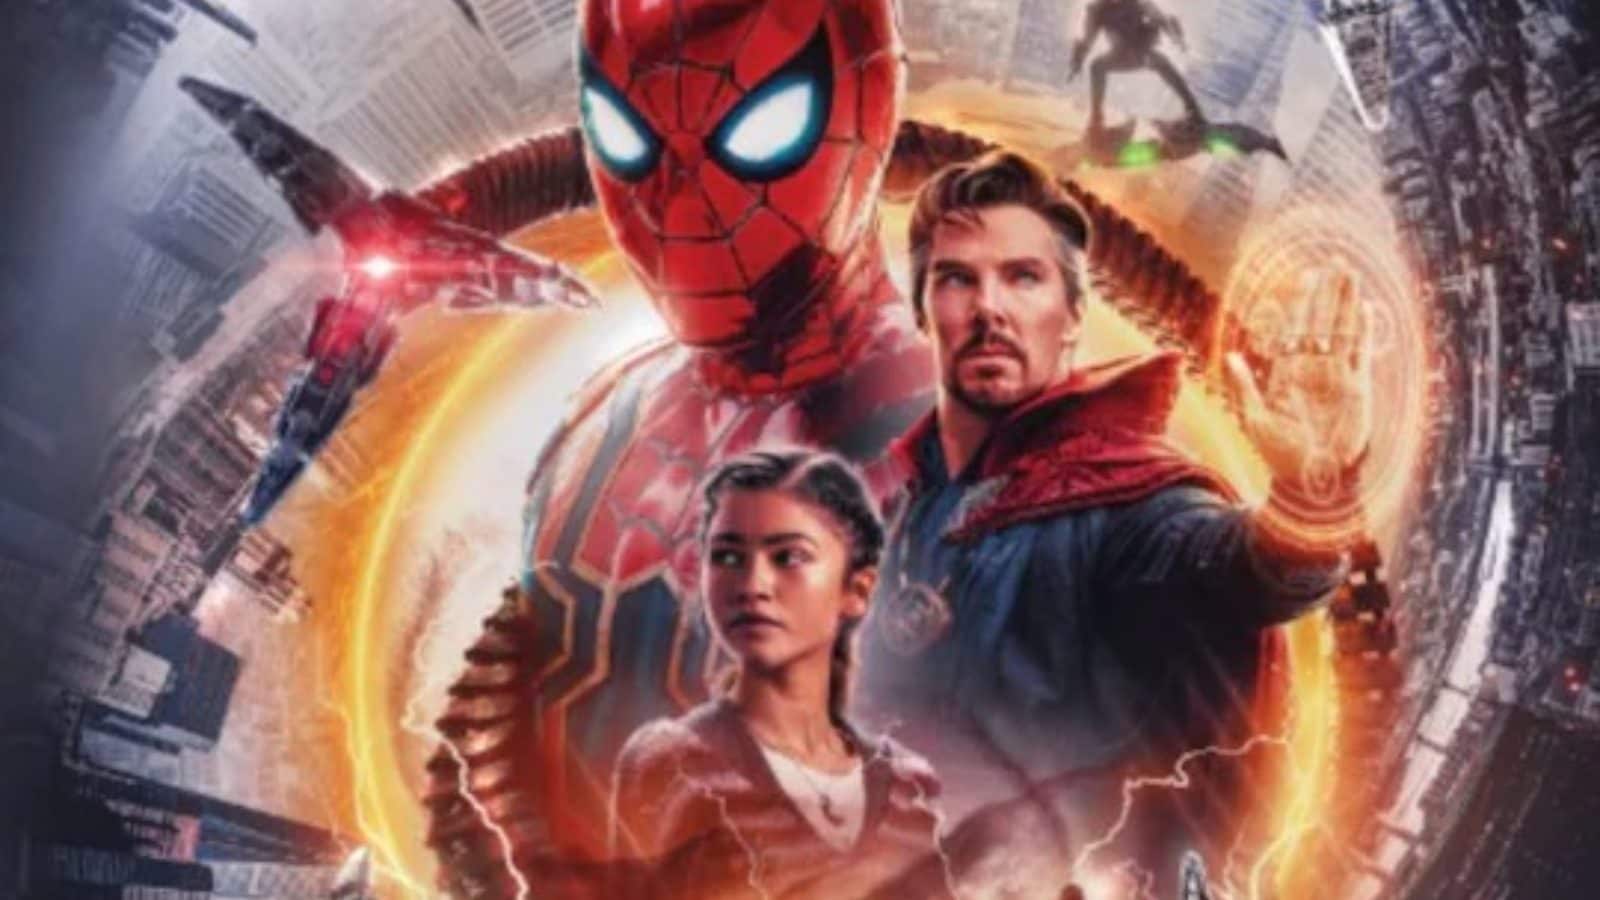 spider man no way home fans in india spending rs 2200 on one movie ticket